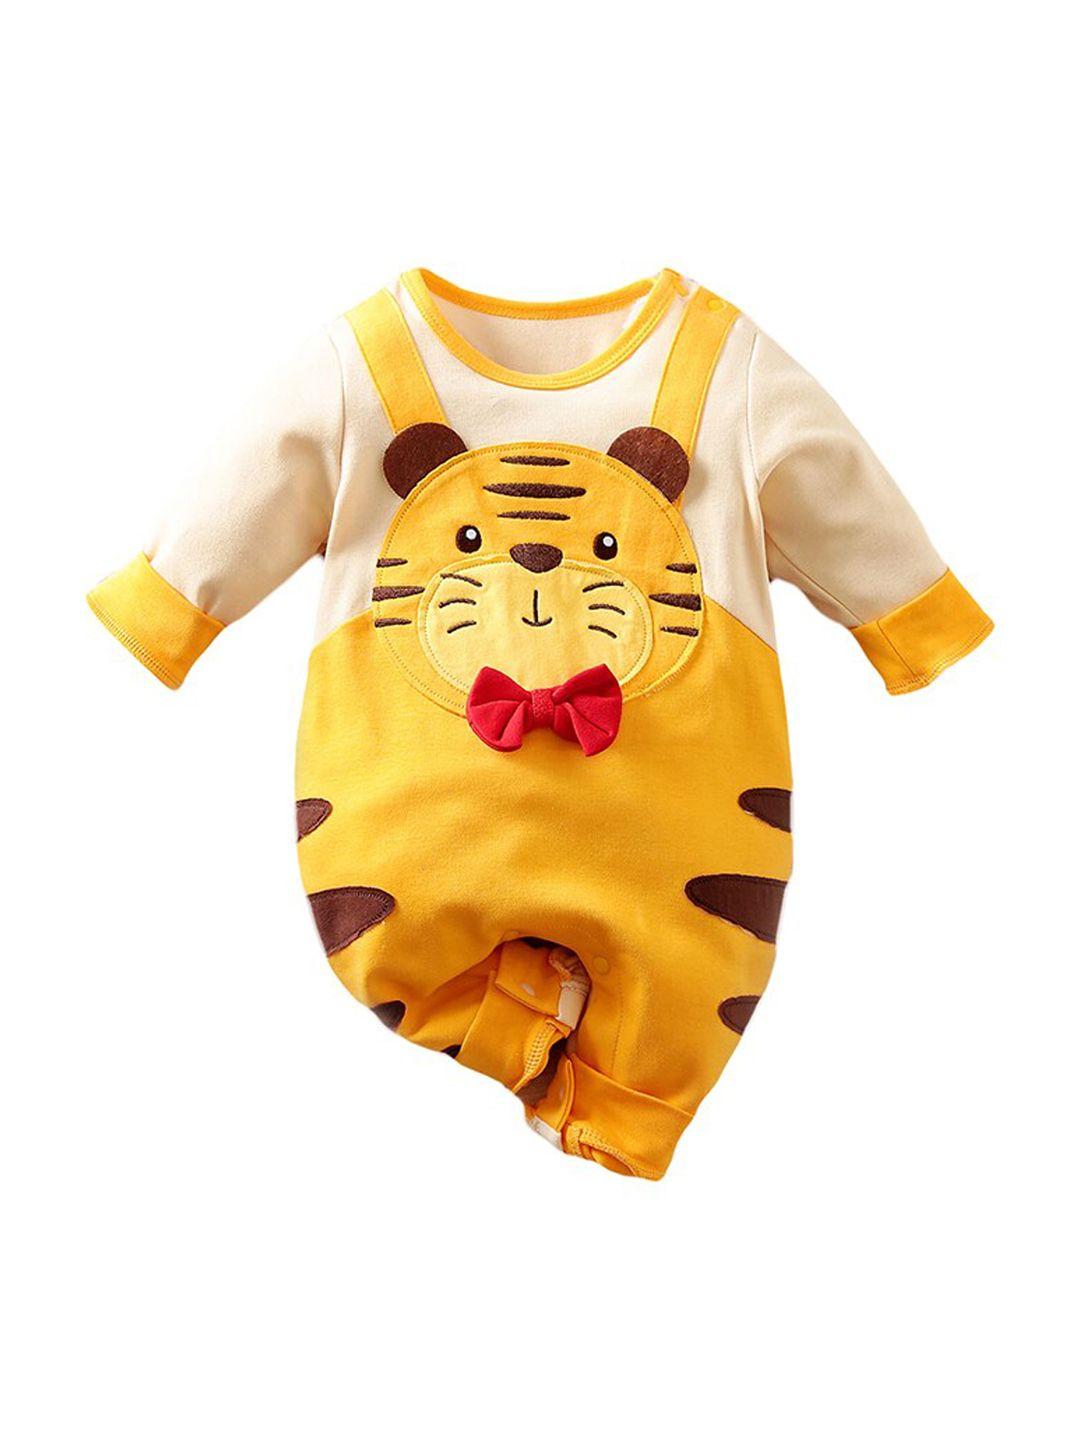 stylecast infant boys yellow graphic printed pure cotton rompers